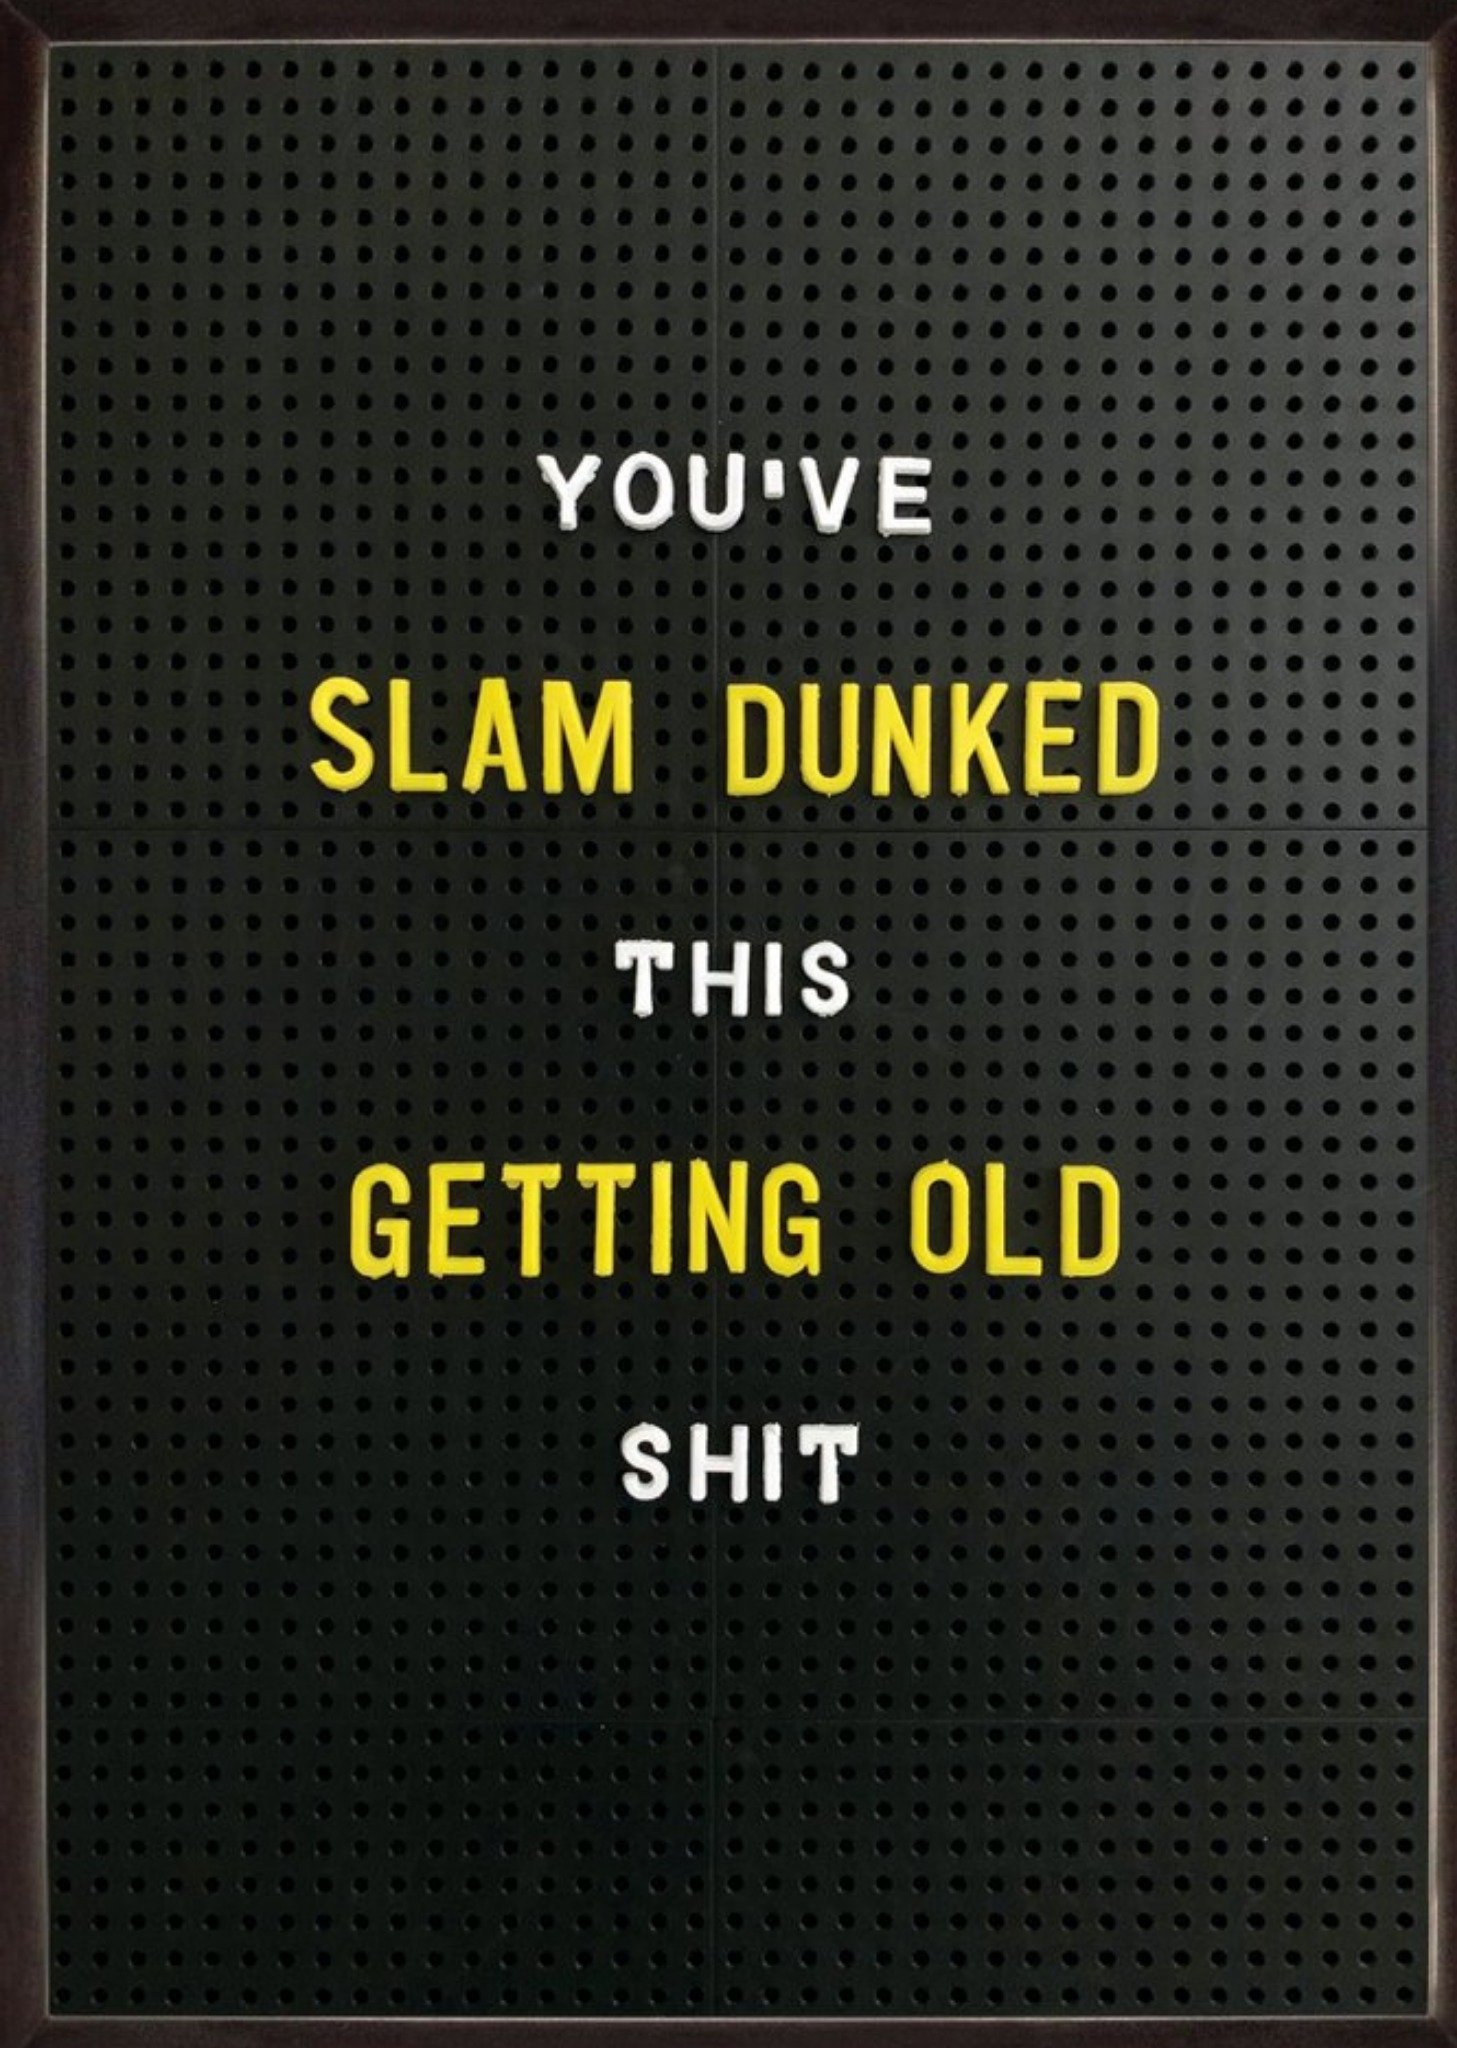 Brainbox Candy Rude Funny Slam Dunked This Getting Old Birthday Card, Large